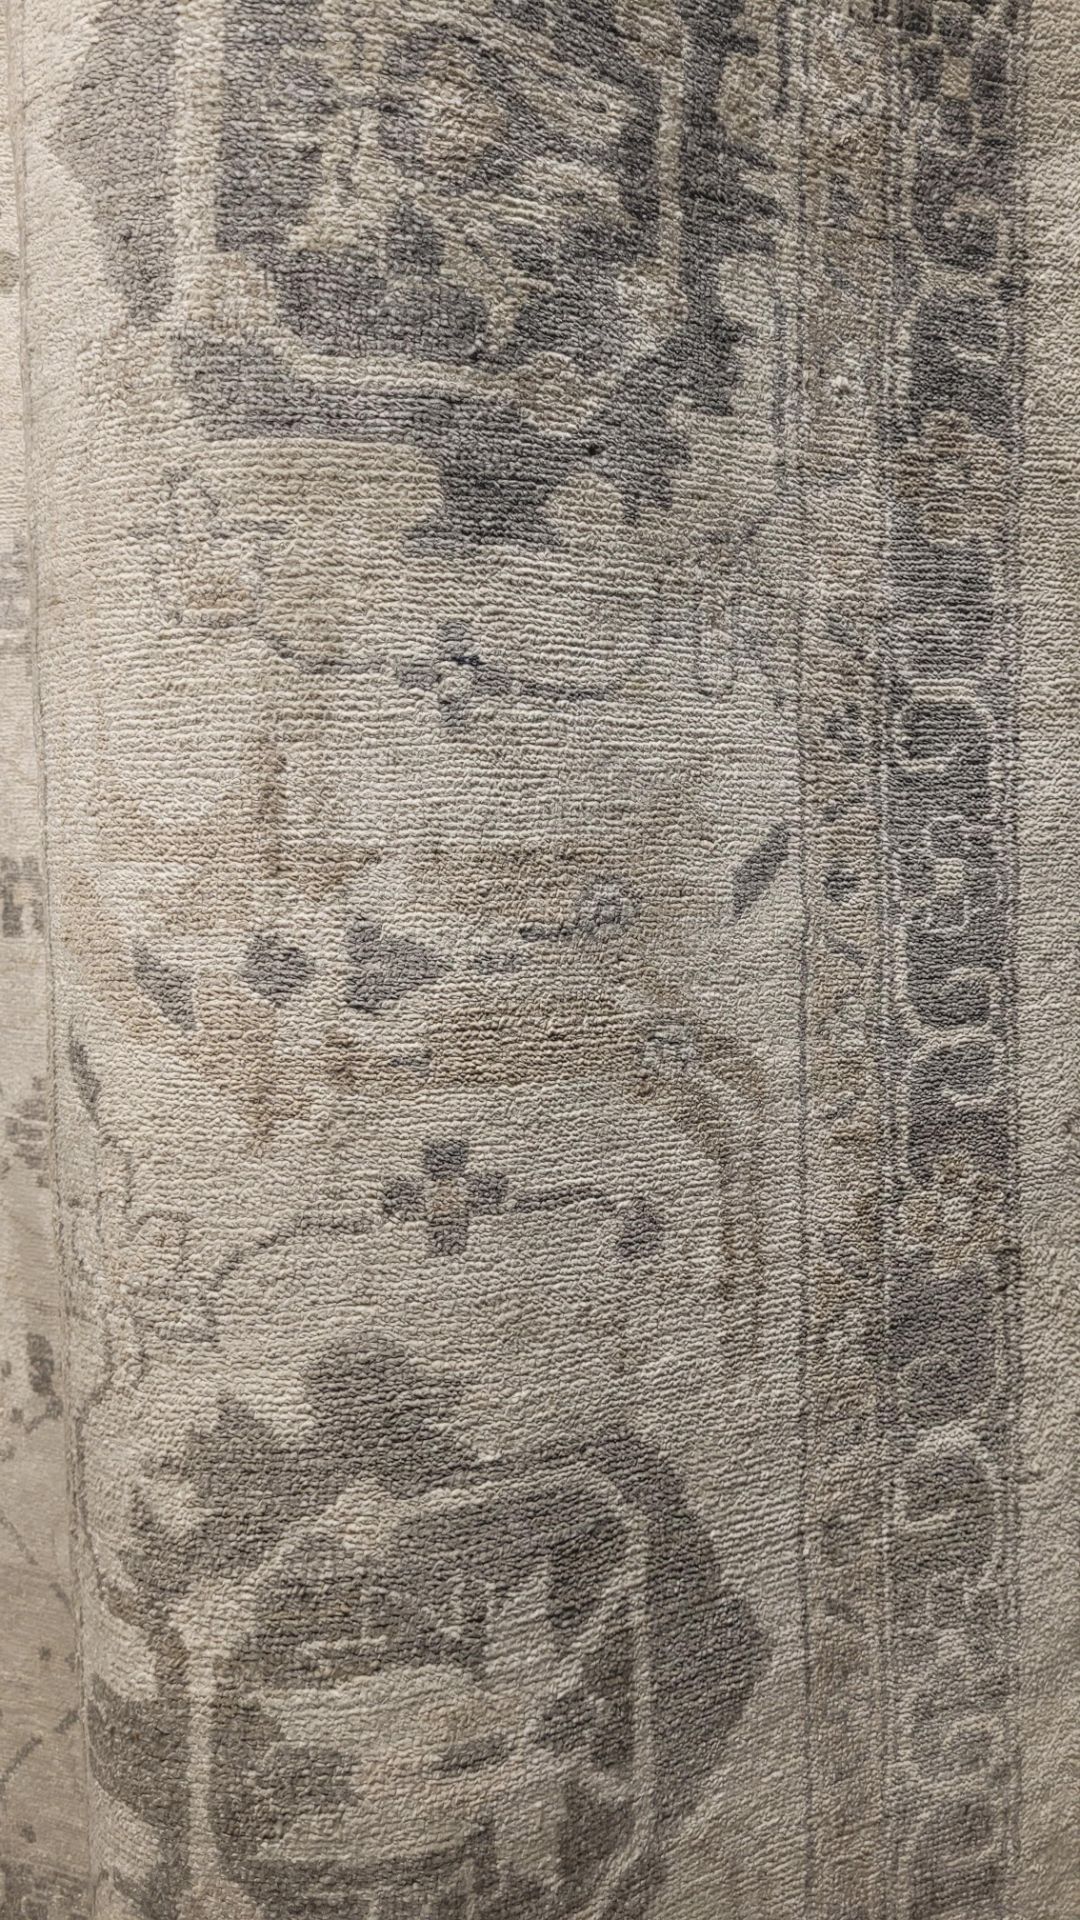 12' X 15' BAMBOO SILK HAND KNOTTED IN INDIA - MSRP $12,999.00 - INVENTORY CODE: DREAM 216142 IV/ - Image 2 of 6